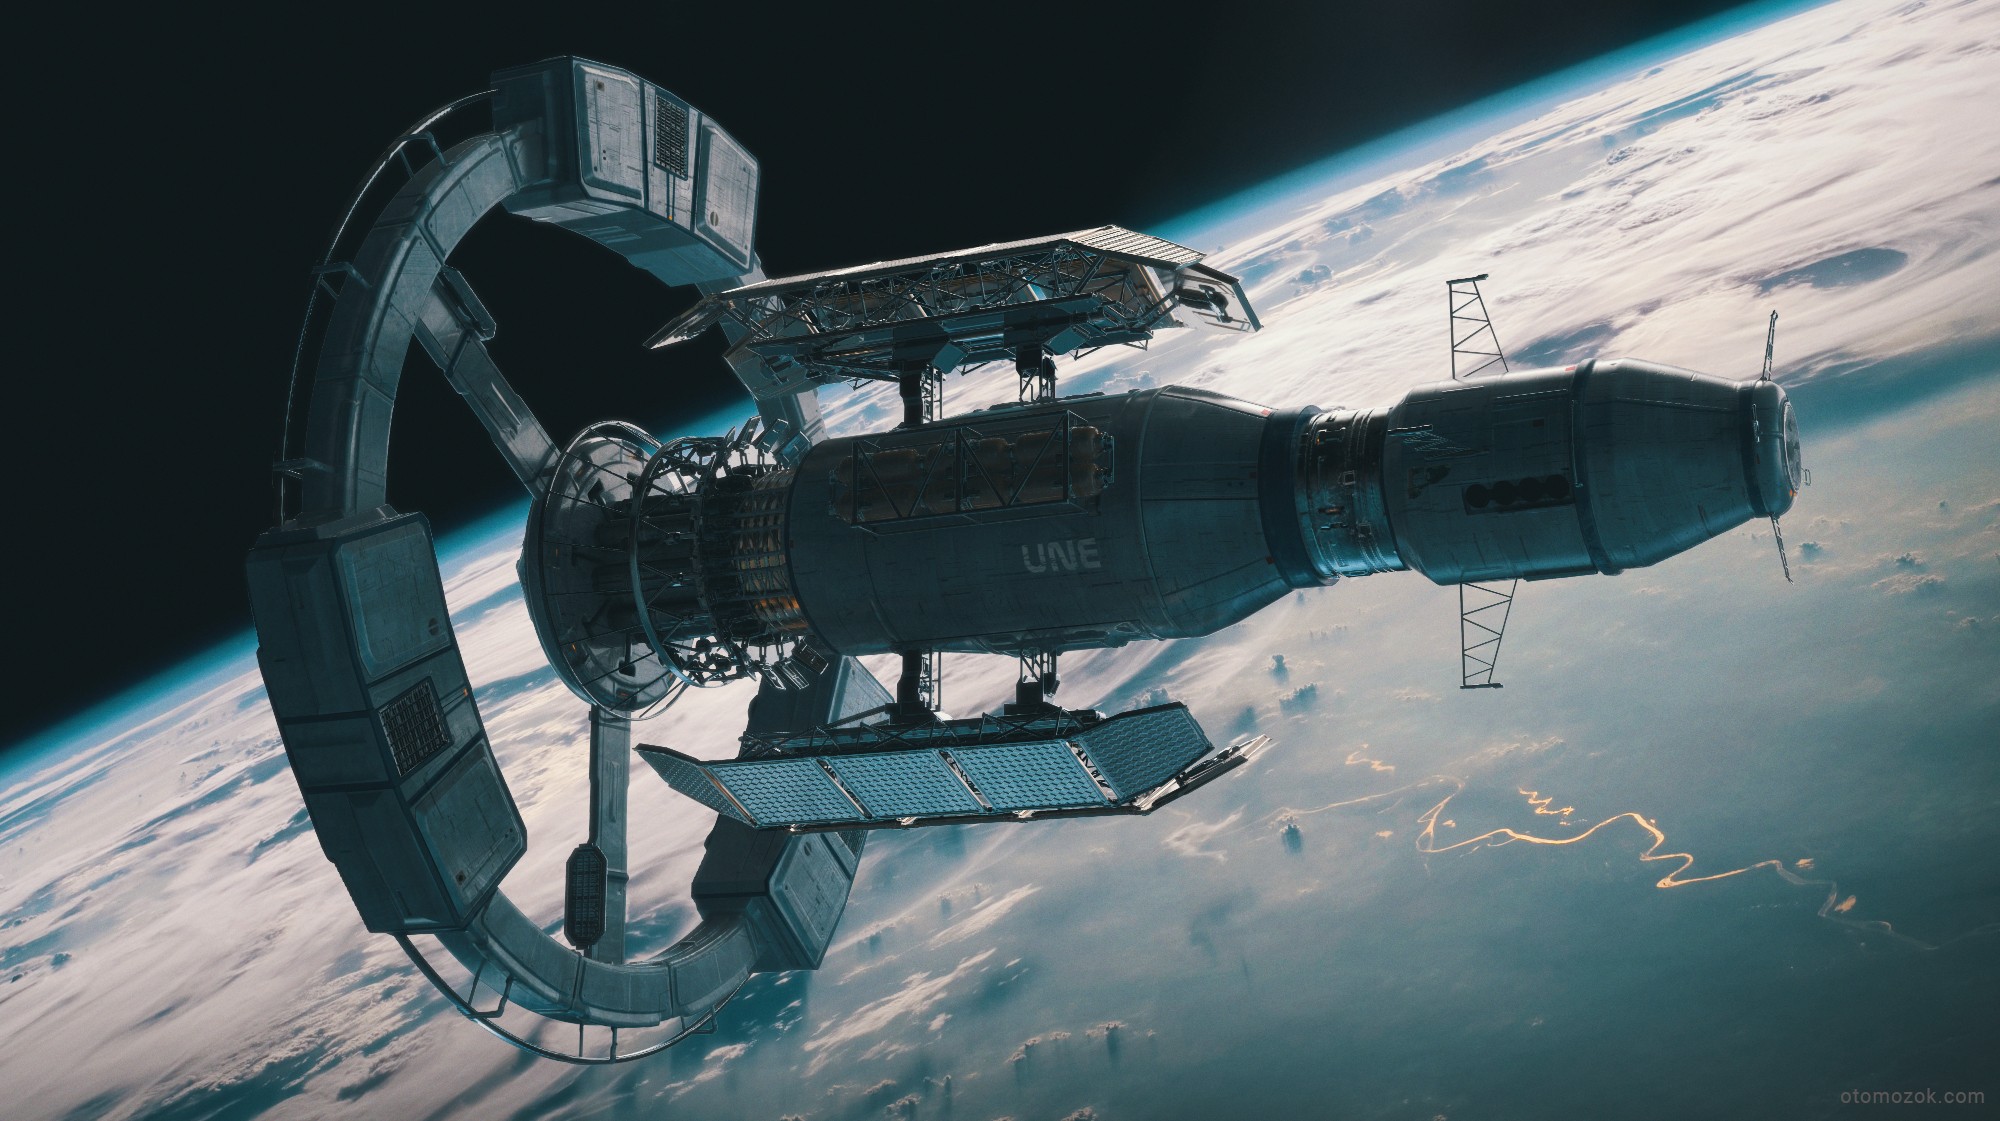 Sci Fi Space Station Hd Wallpaper By Artur Gurin